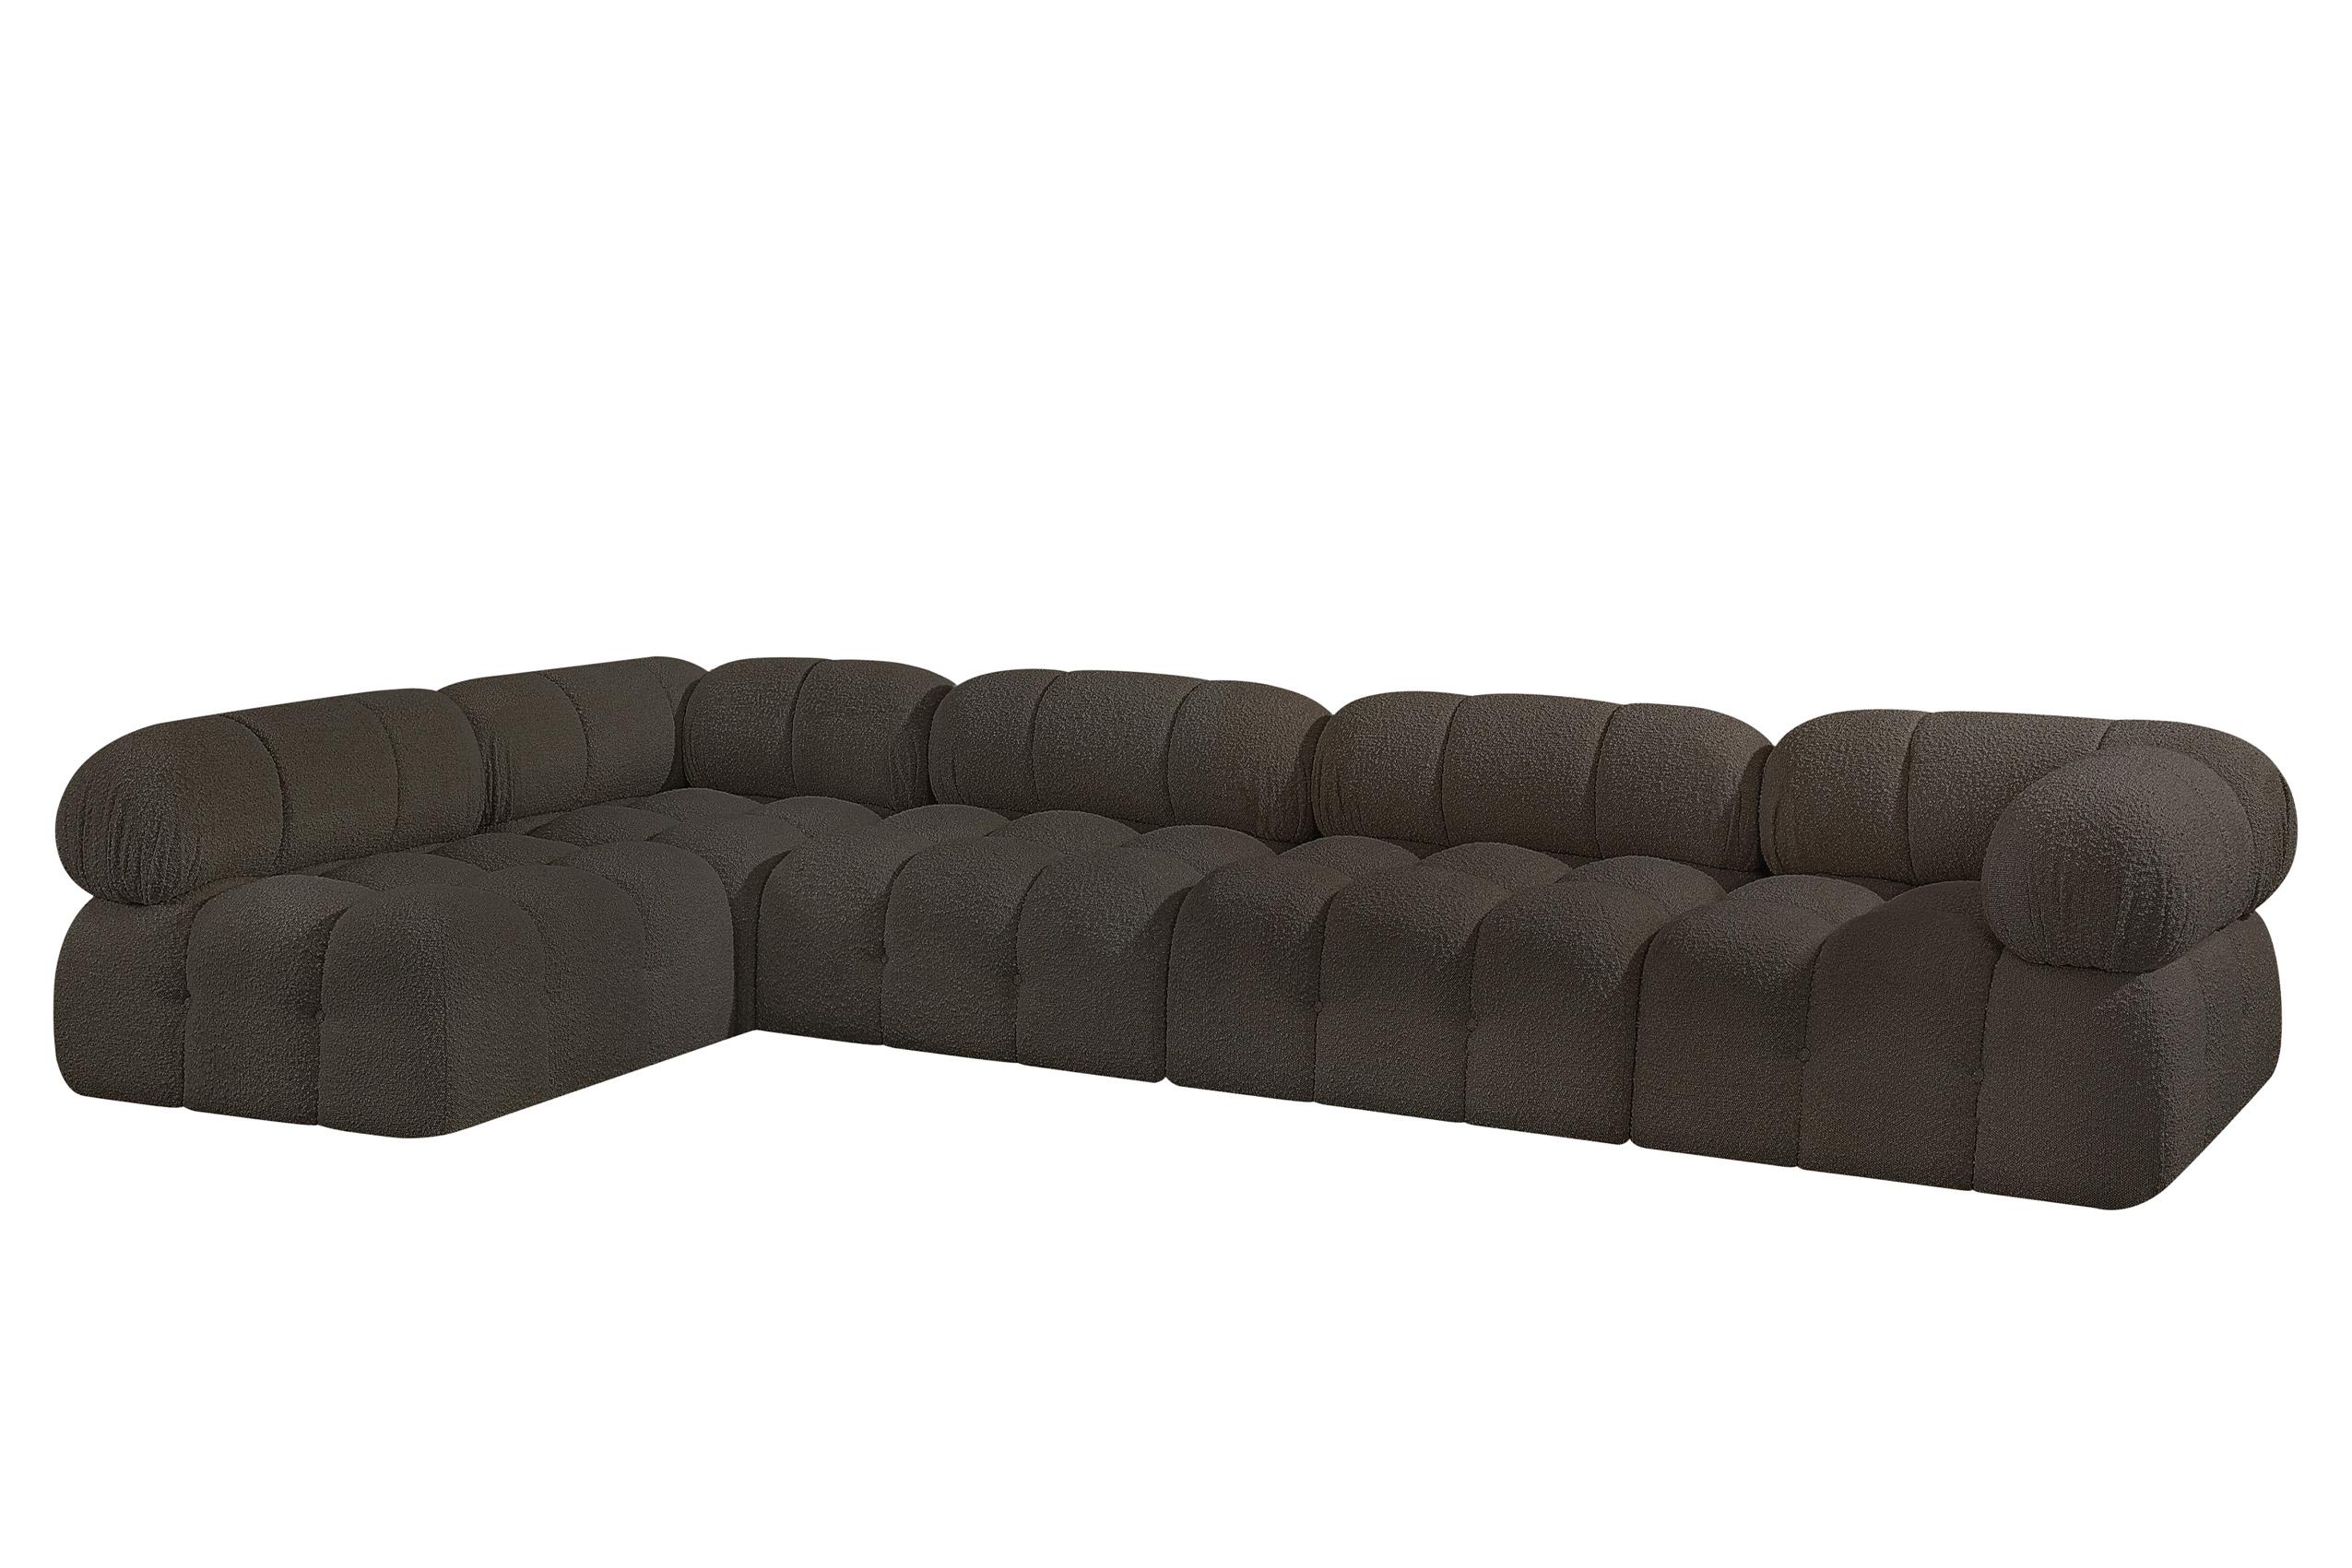 Contemporary, Modern Modular Sectional AMES 611Brown-Sec5A 611Brown-Sec5A in Brown 